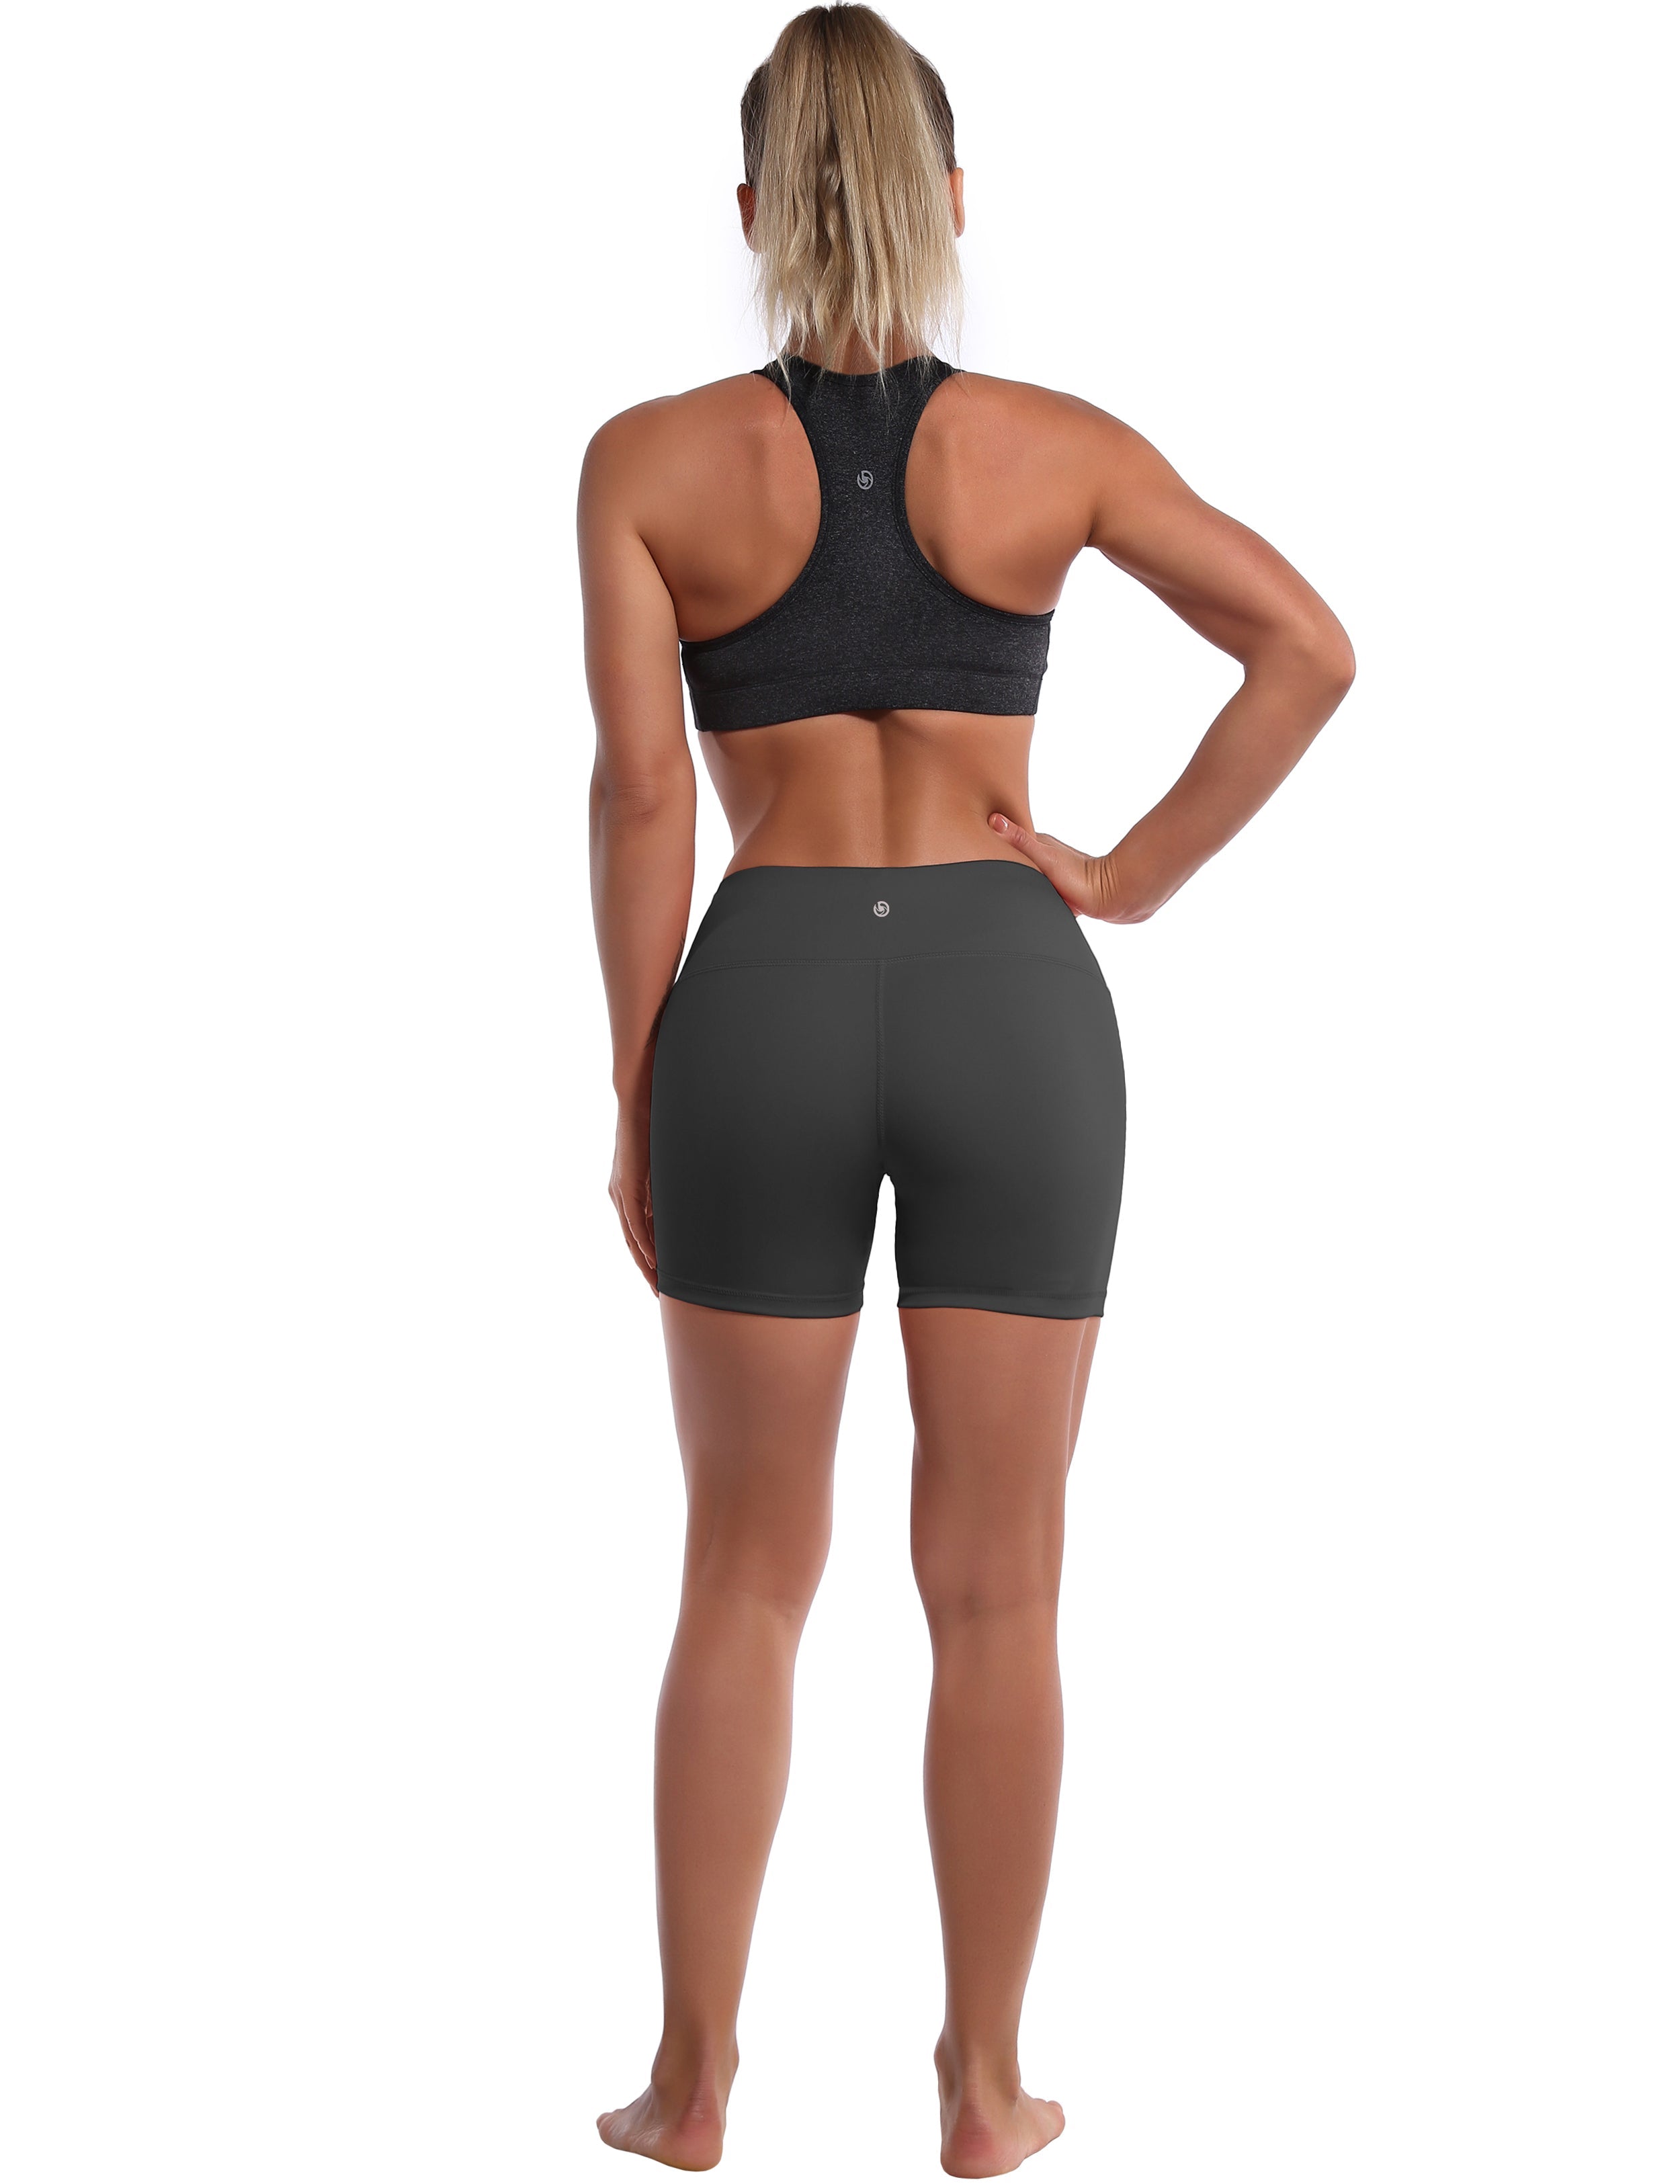 4" Golf Shorts shadowcharcoal Sleek, soft, smooth and totally comfortable: our newest style is here. Softest-ever fabric High elasticity High density 4-way stretch Fabric doesn't attract lint easily No see-through Moisture-wicking Machine wash 75% Nylon, 25% Spandex